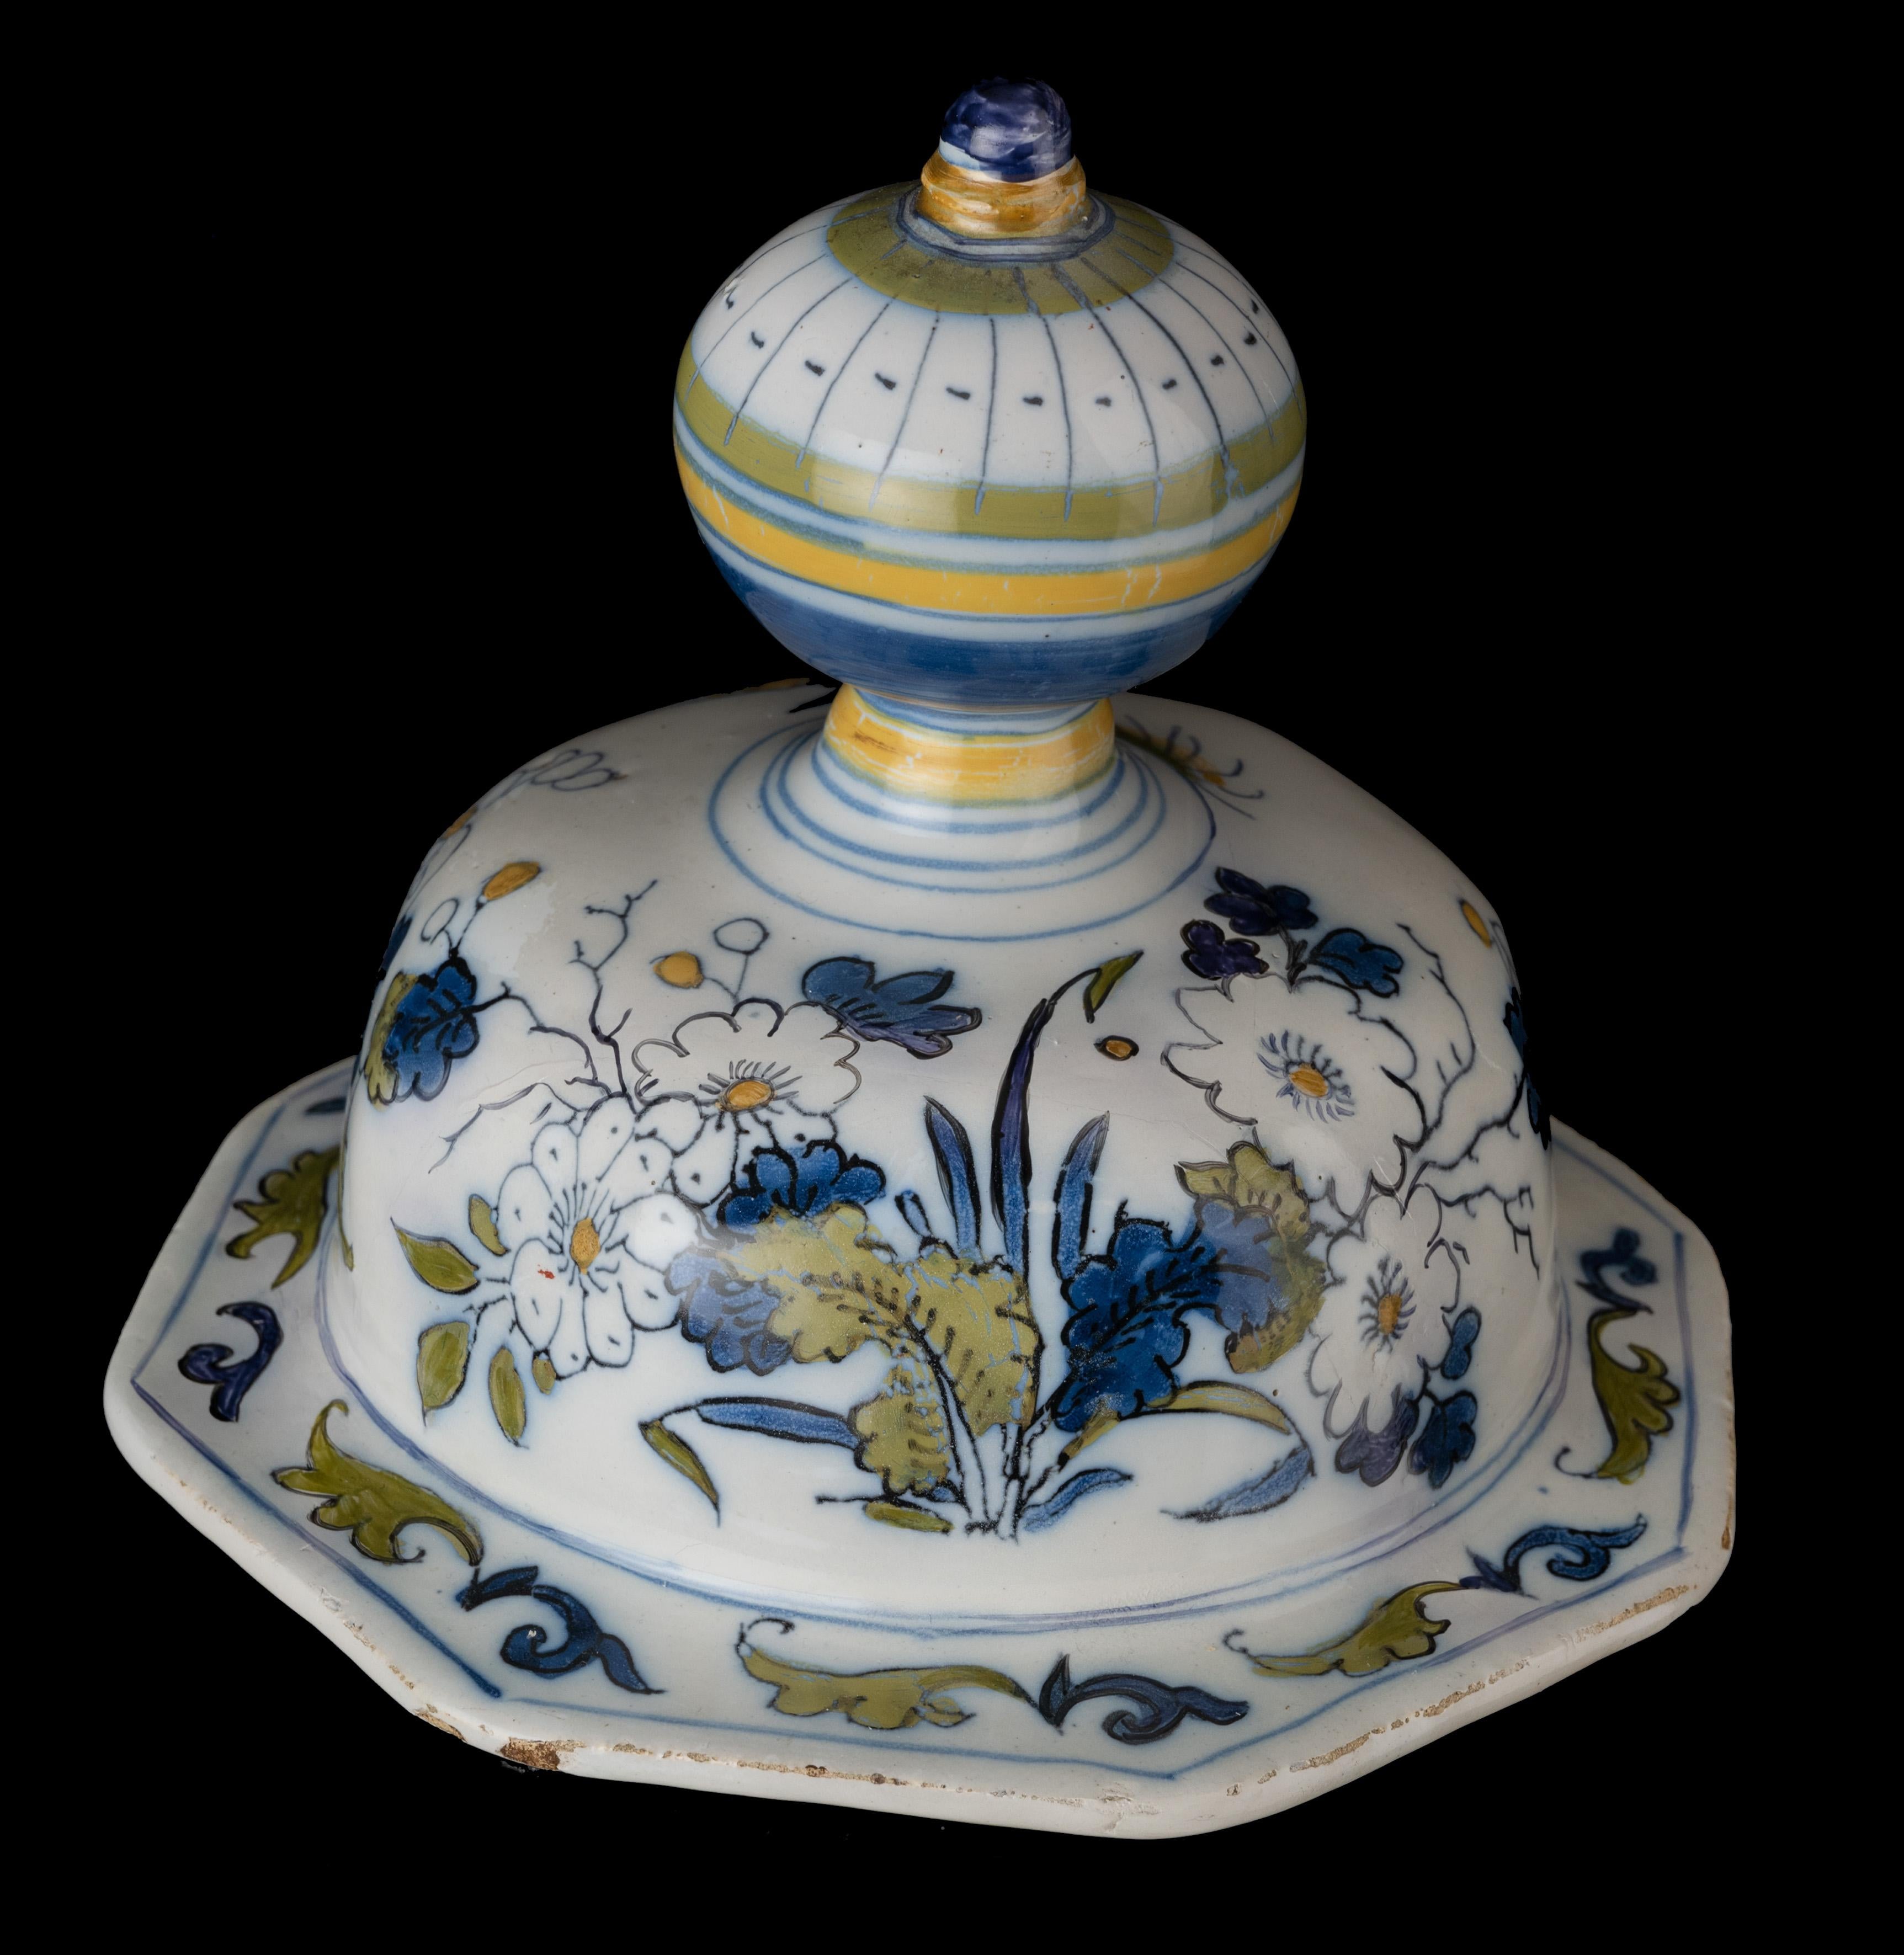 Delft Polychrome Covered Jar with Peacock and Dragon in Landscape, 1690-1700 For Sale 7